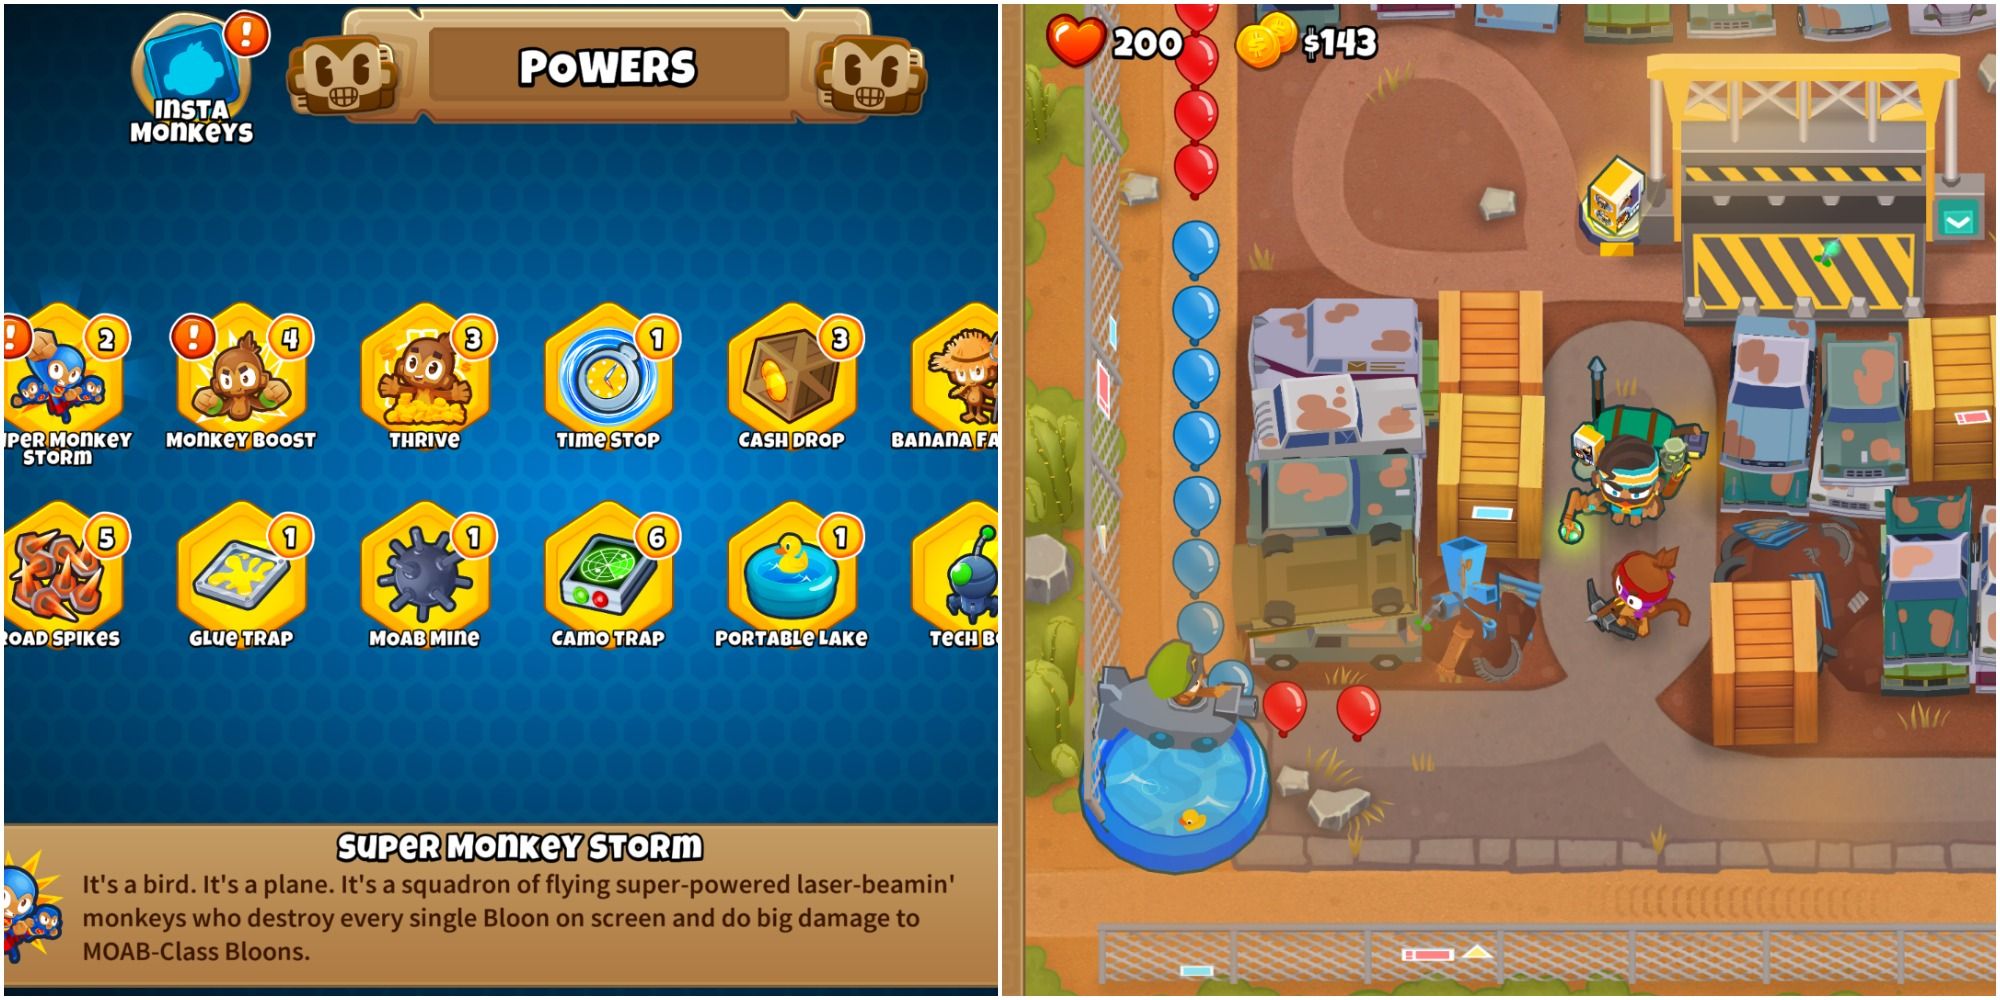 BTD6 Powers featured image